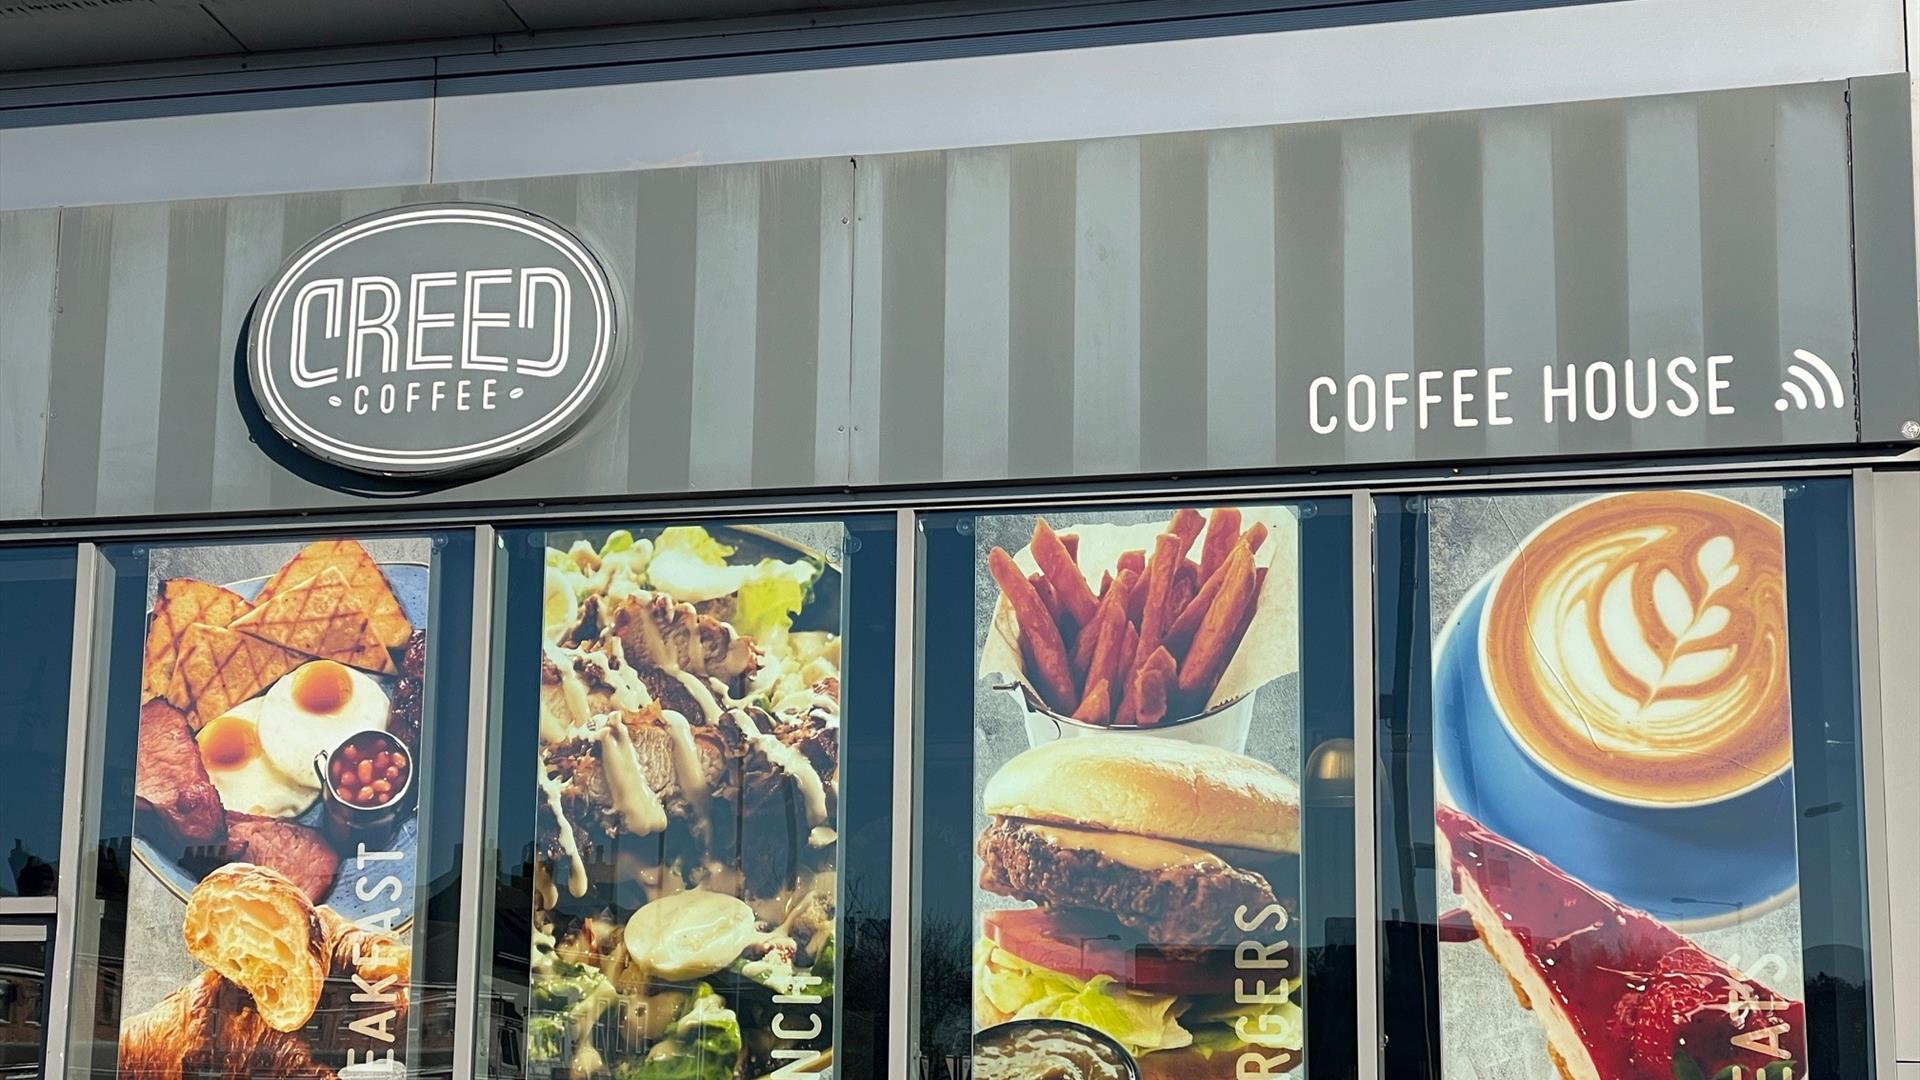 Exterior of Creed Coffee House in Carrickfergus with banners in windows displaying food options